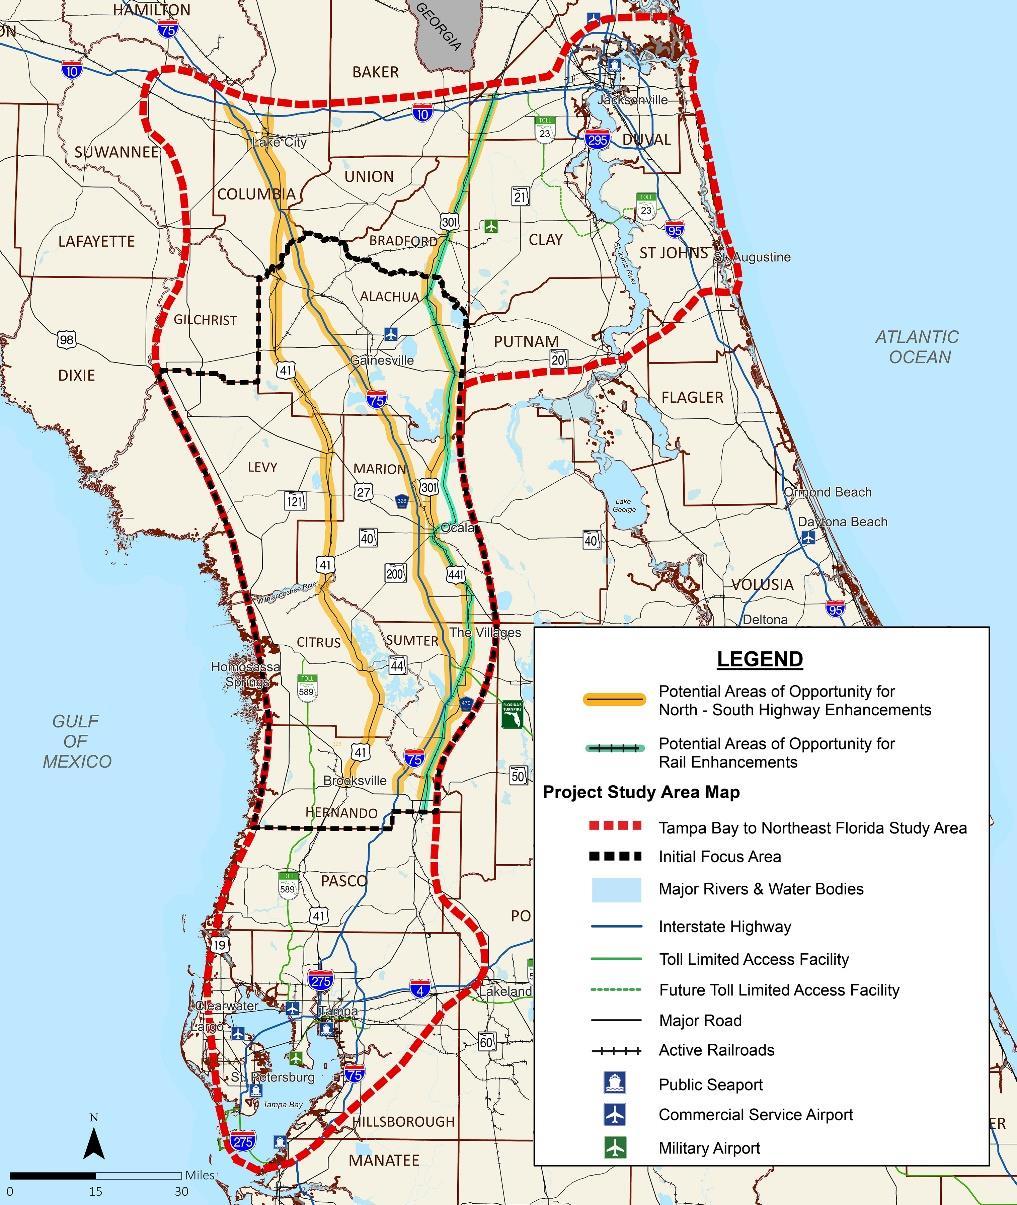 Framework for Enhanced and New High Speed, High Capacity Transportation Corridors Immediately optimize existing transportation corridors Evaluate potential enhancements to, or